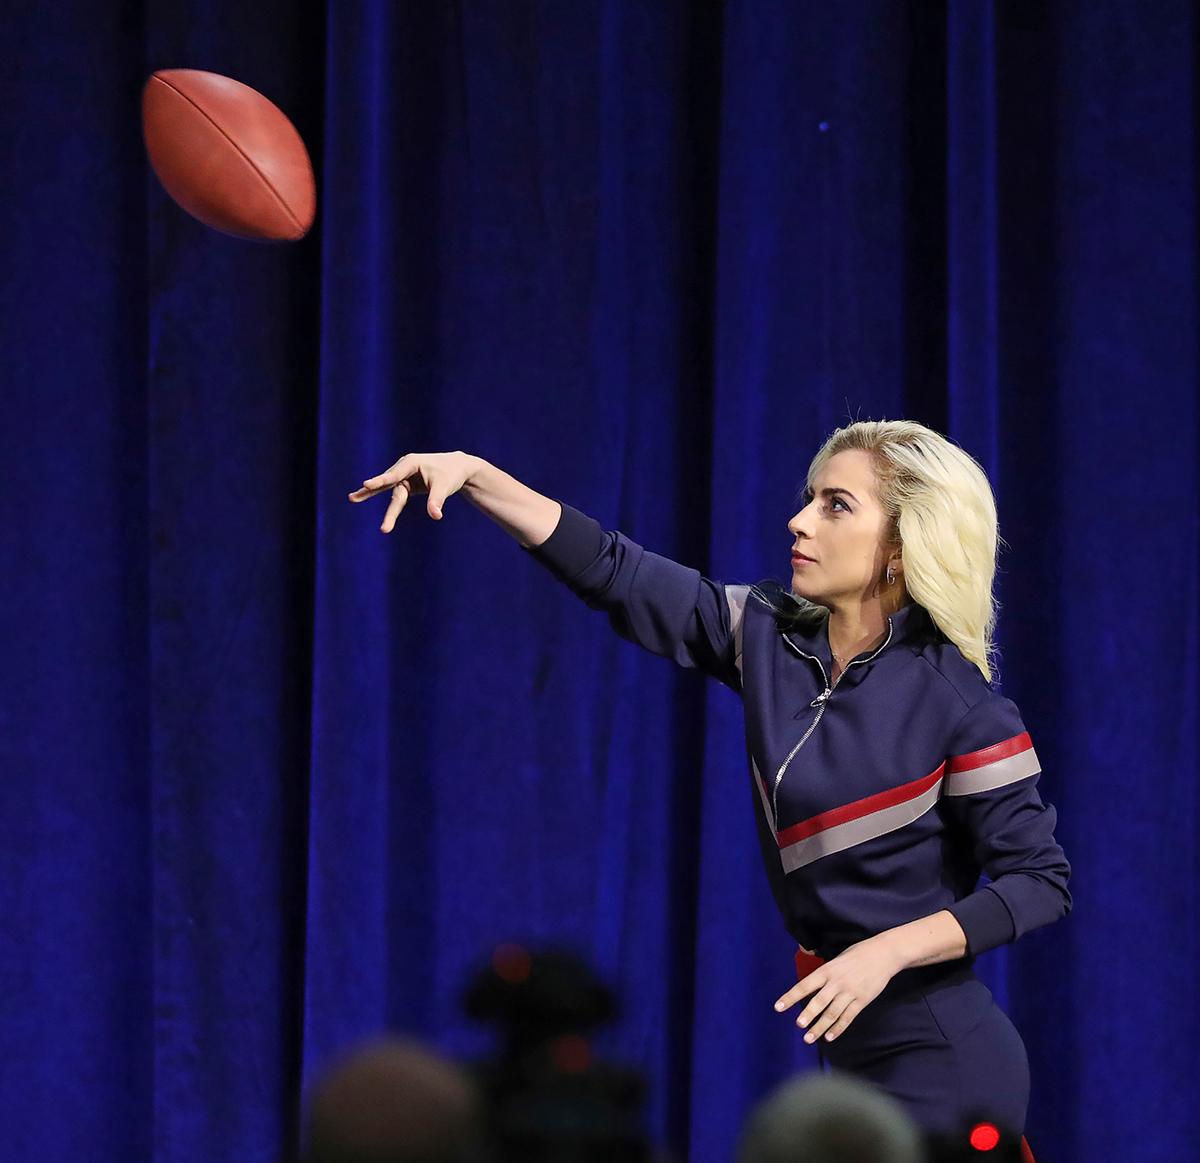 Lady Gaga during an NFL football news conference about the halftime show for Super Bowl 51 in Houston on Feb. 2, 2017. (Curtis Compton/Atlanta Journal-Constitution via AP)